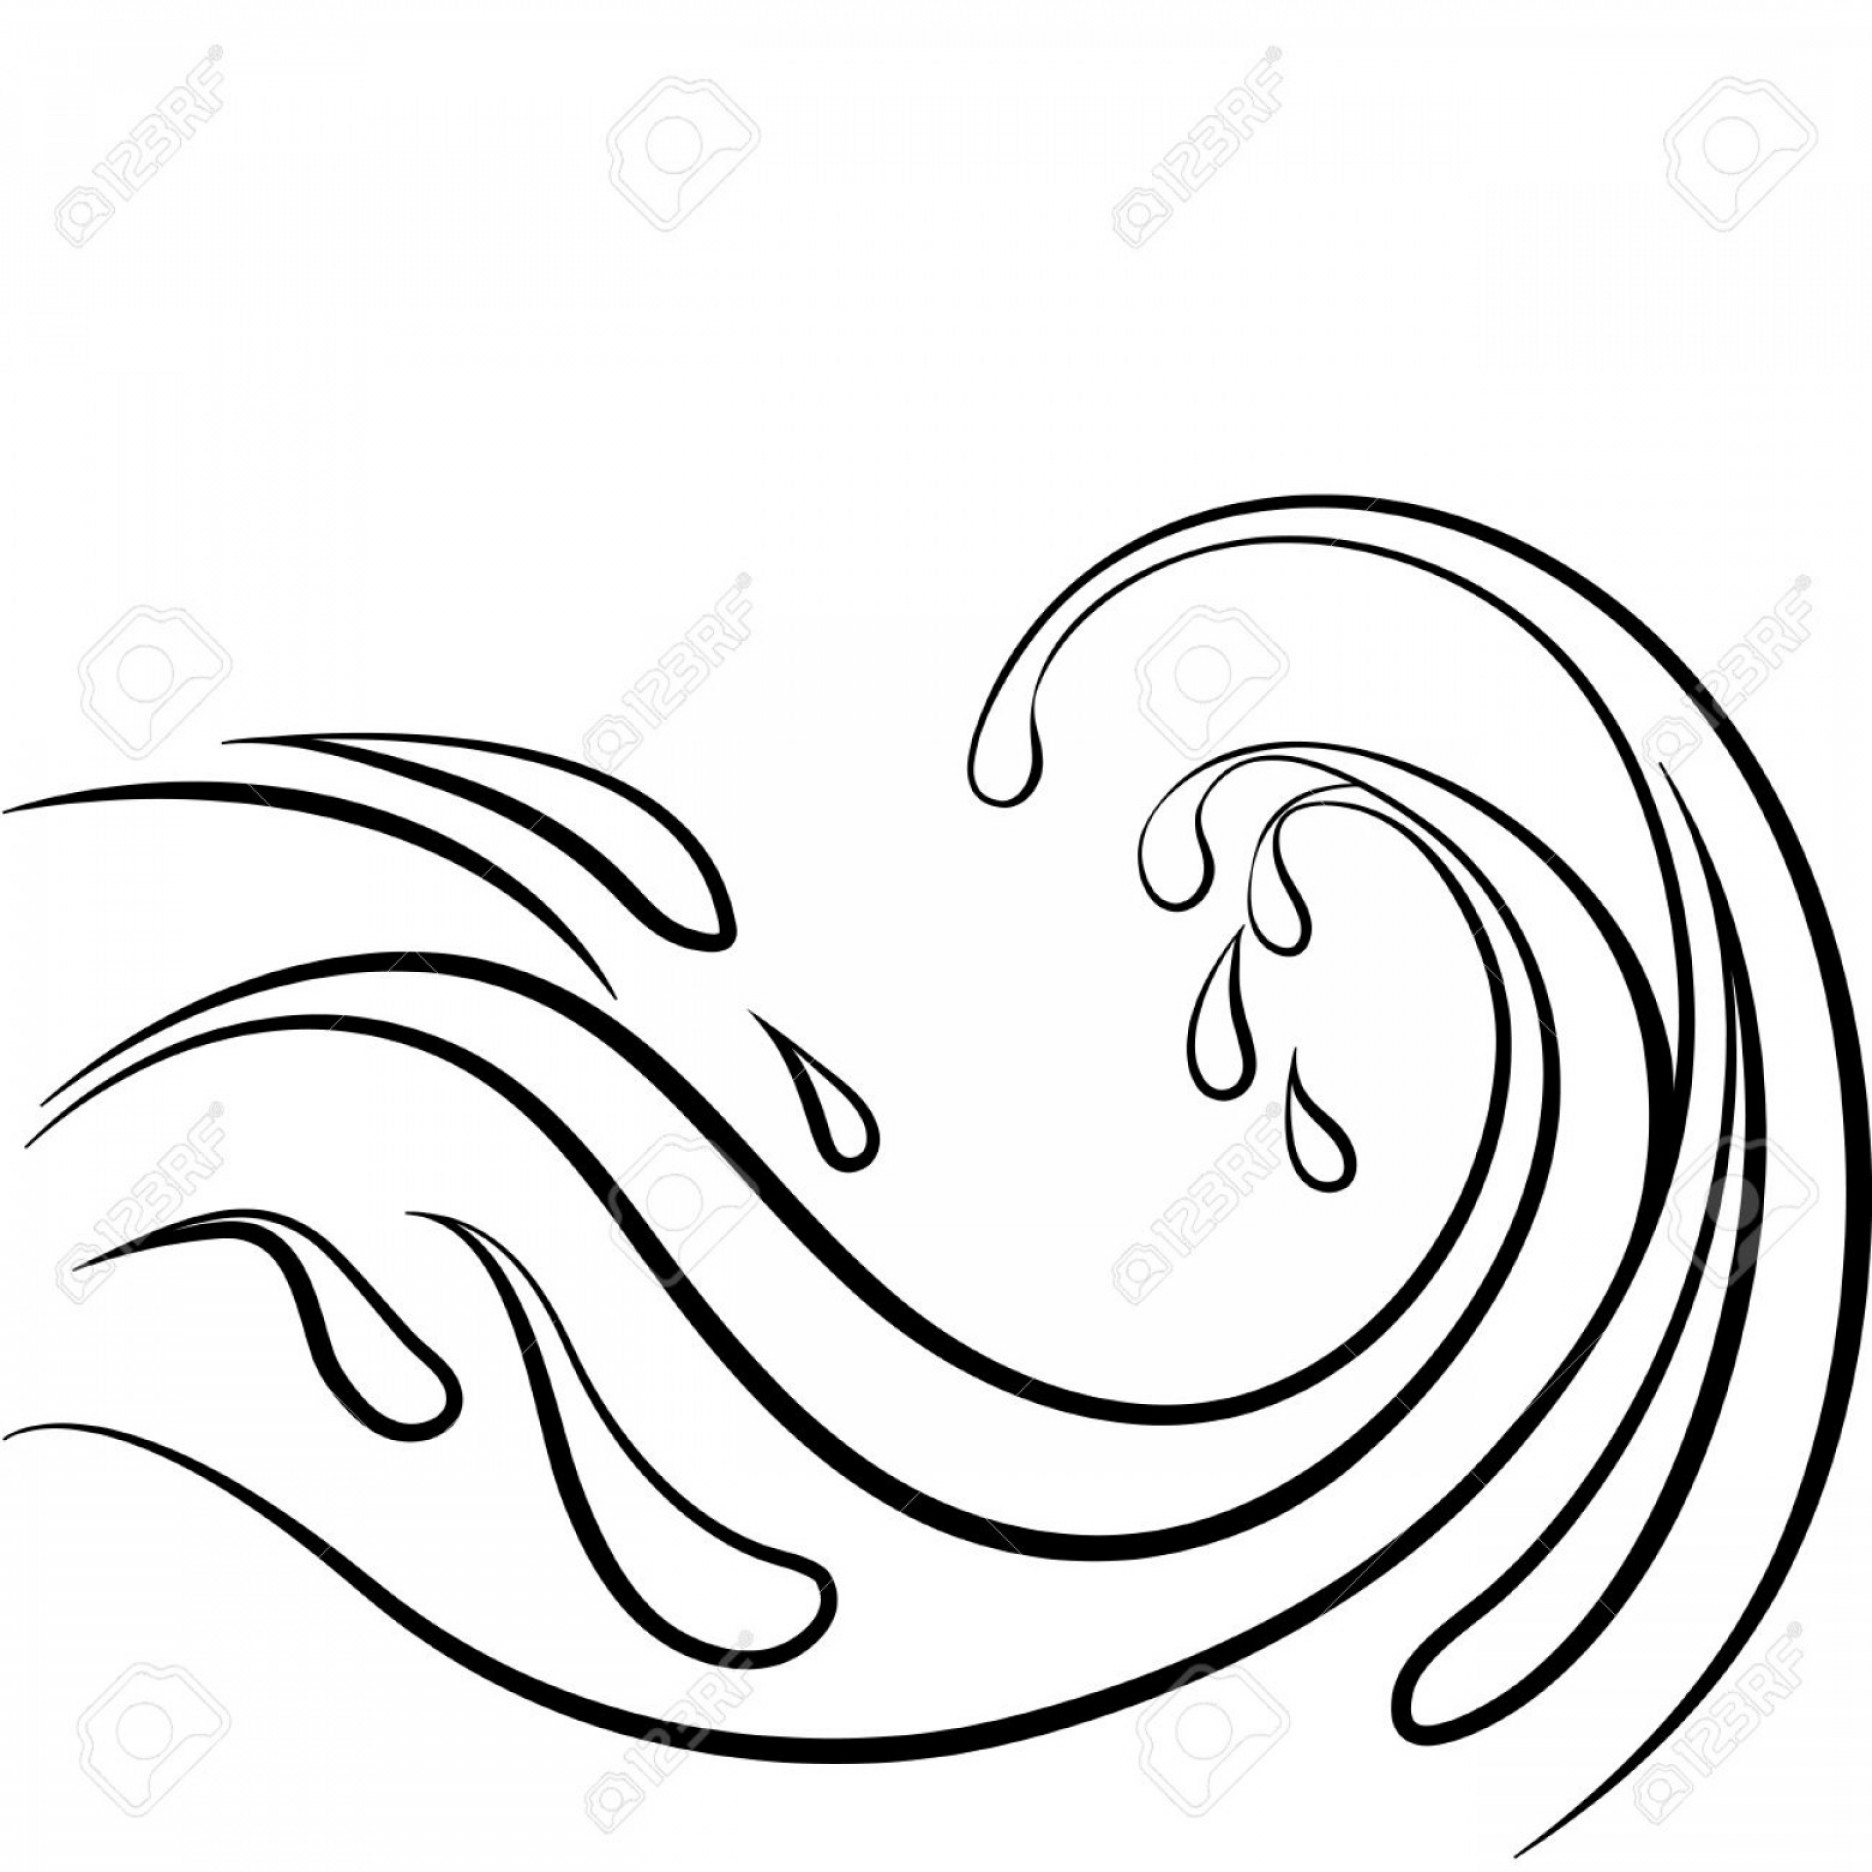 Photostock Vector Storm Water Wave Black Outline On White